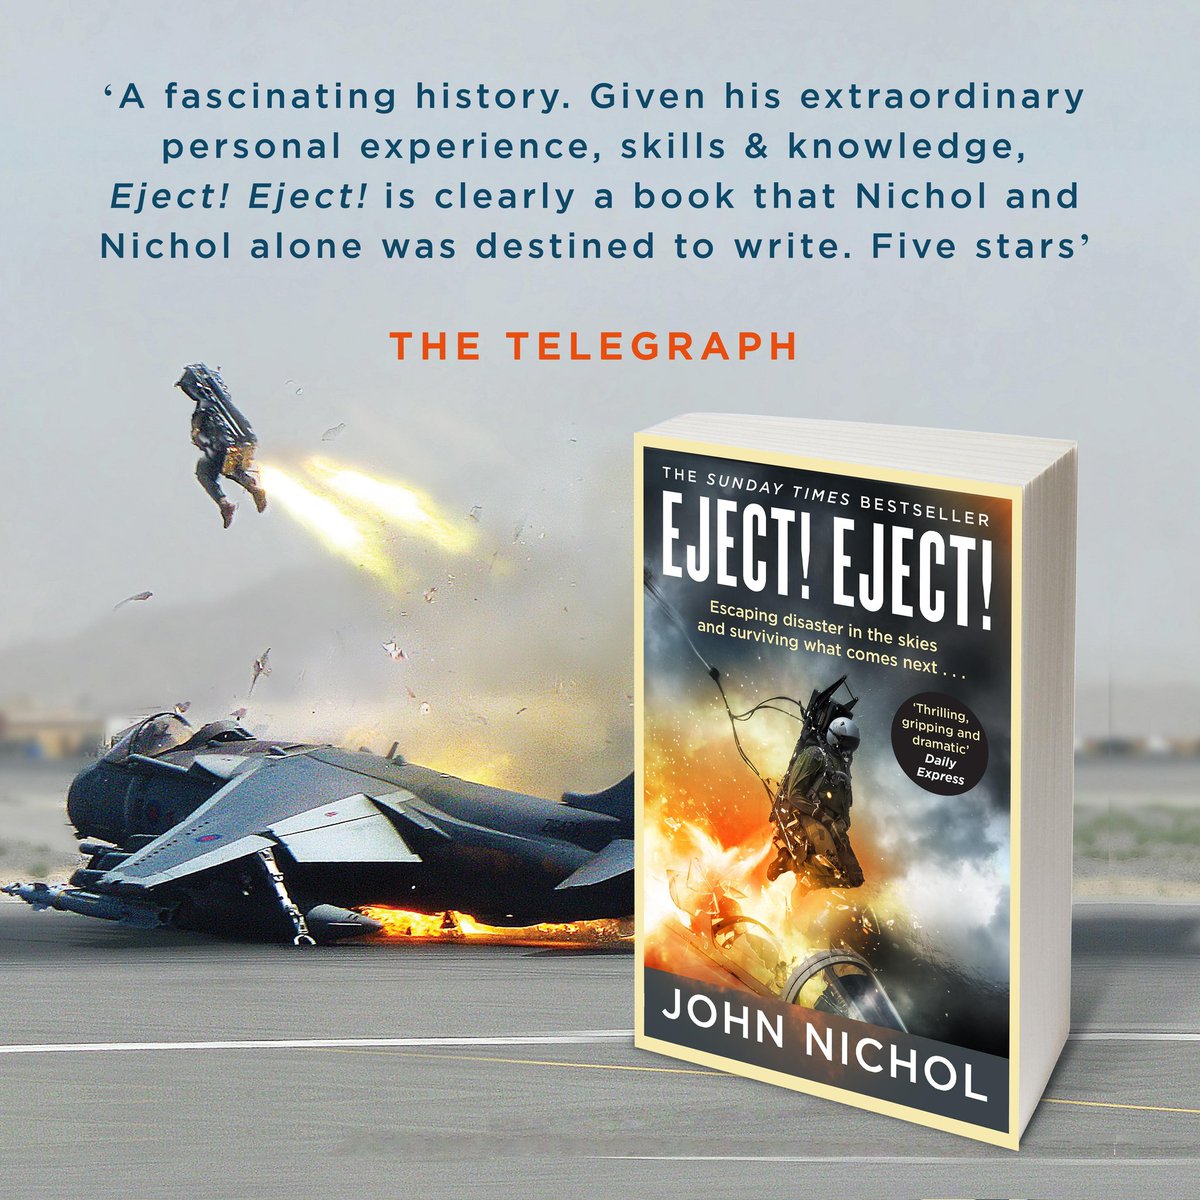 RT comp to celebrate EJECT! EJECT! paperback publication... RT for chance to win a SIGNED (I know; generous eh?) HARDBACK copy before paperback publication next week: amazon.co.uk/Eject-John-Nic…